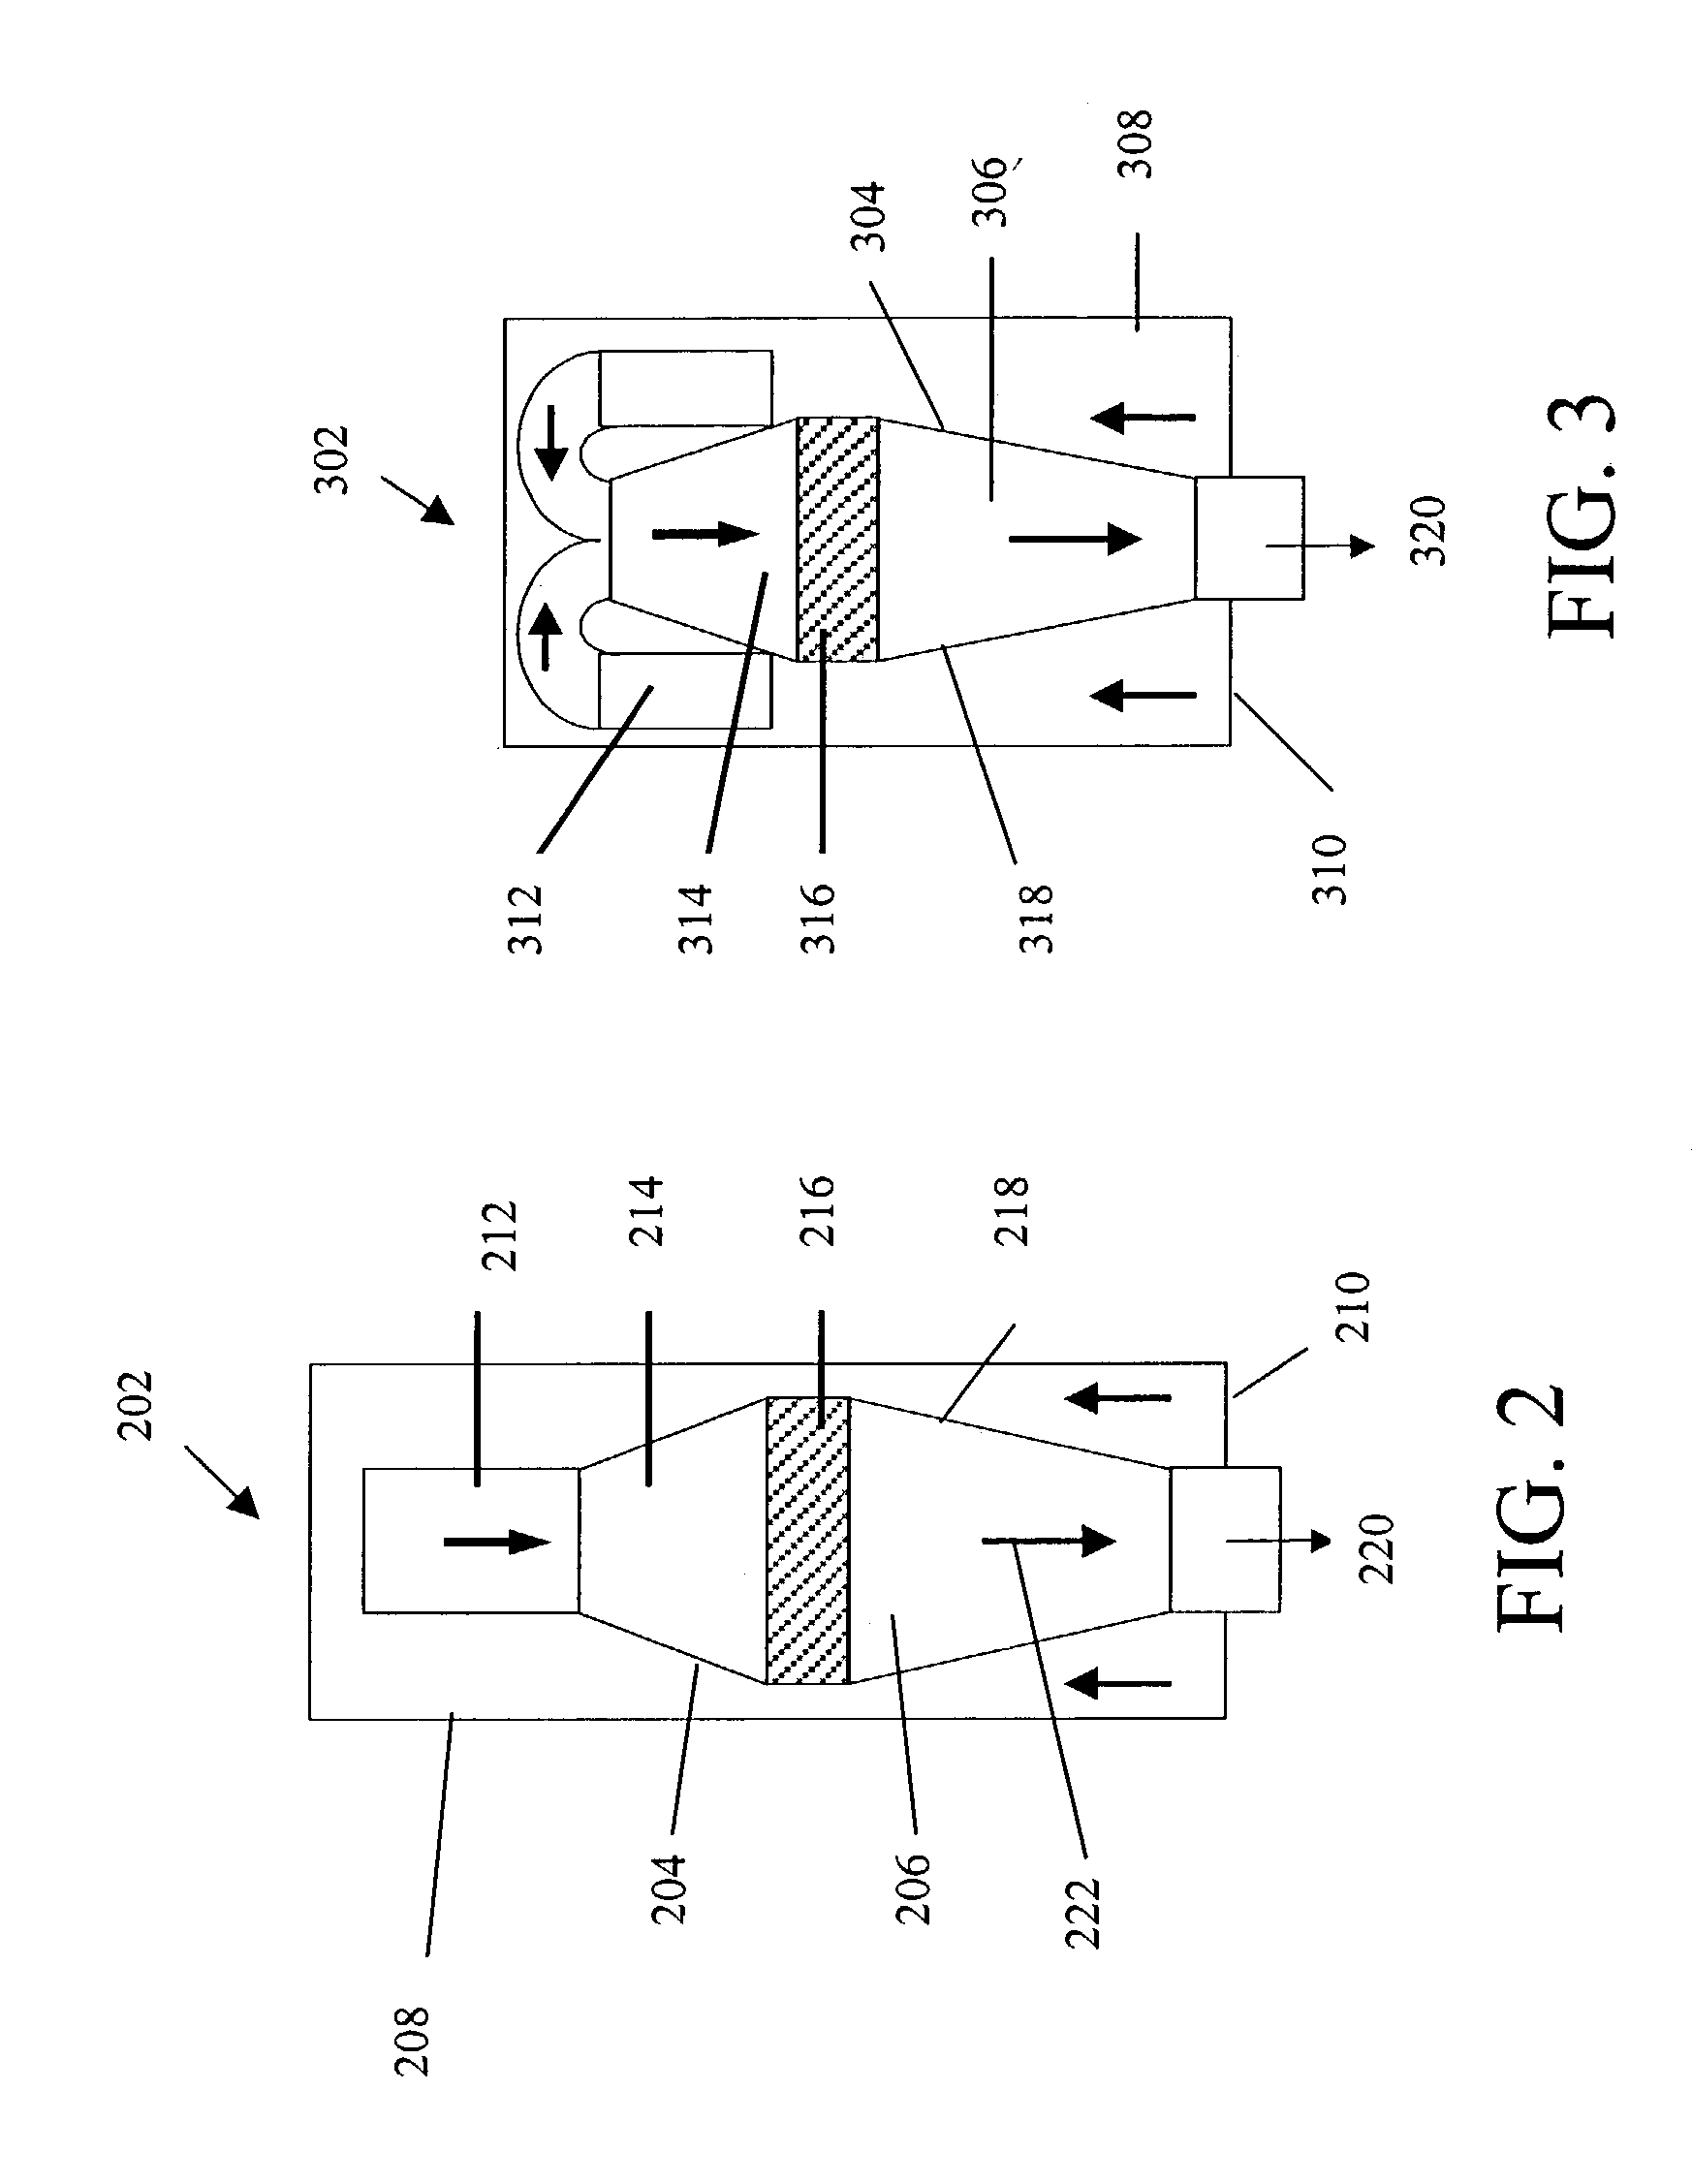 Fuel-air premixing system for a catalytic combustor